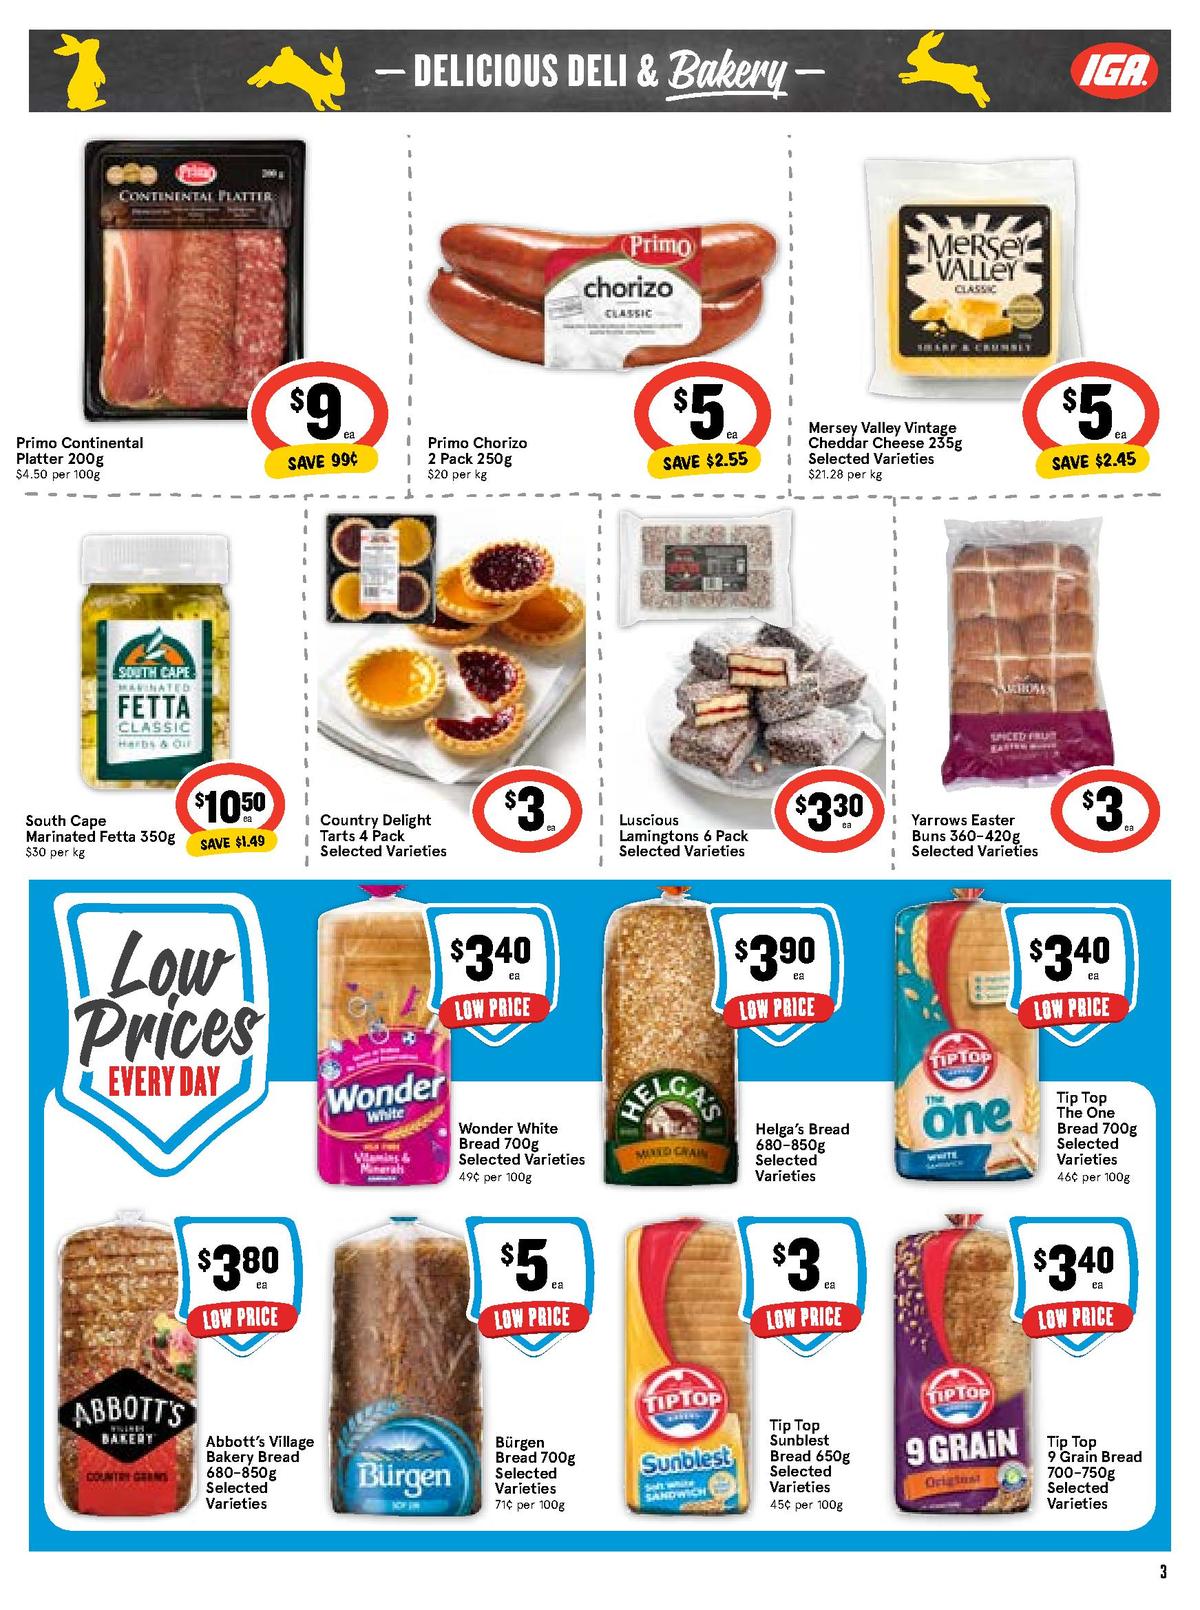 IGA Catalogues from 10 April